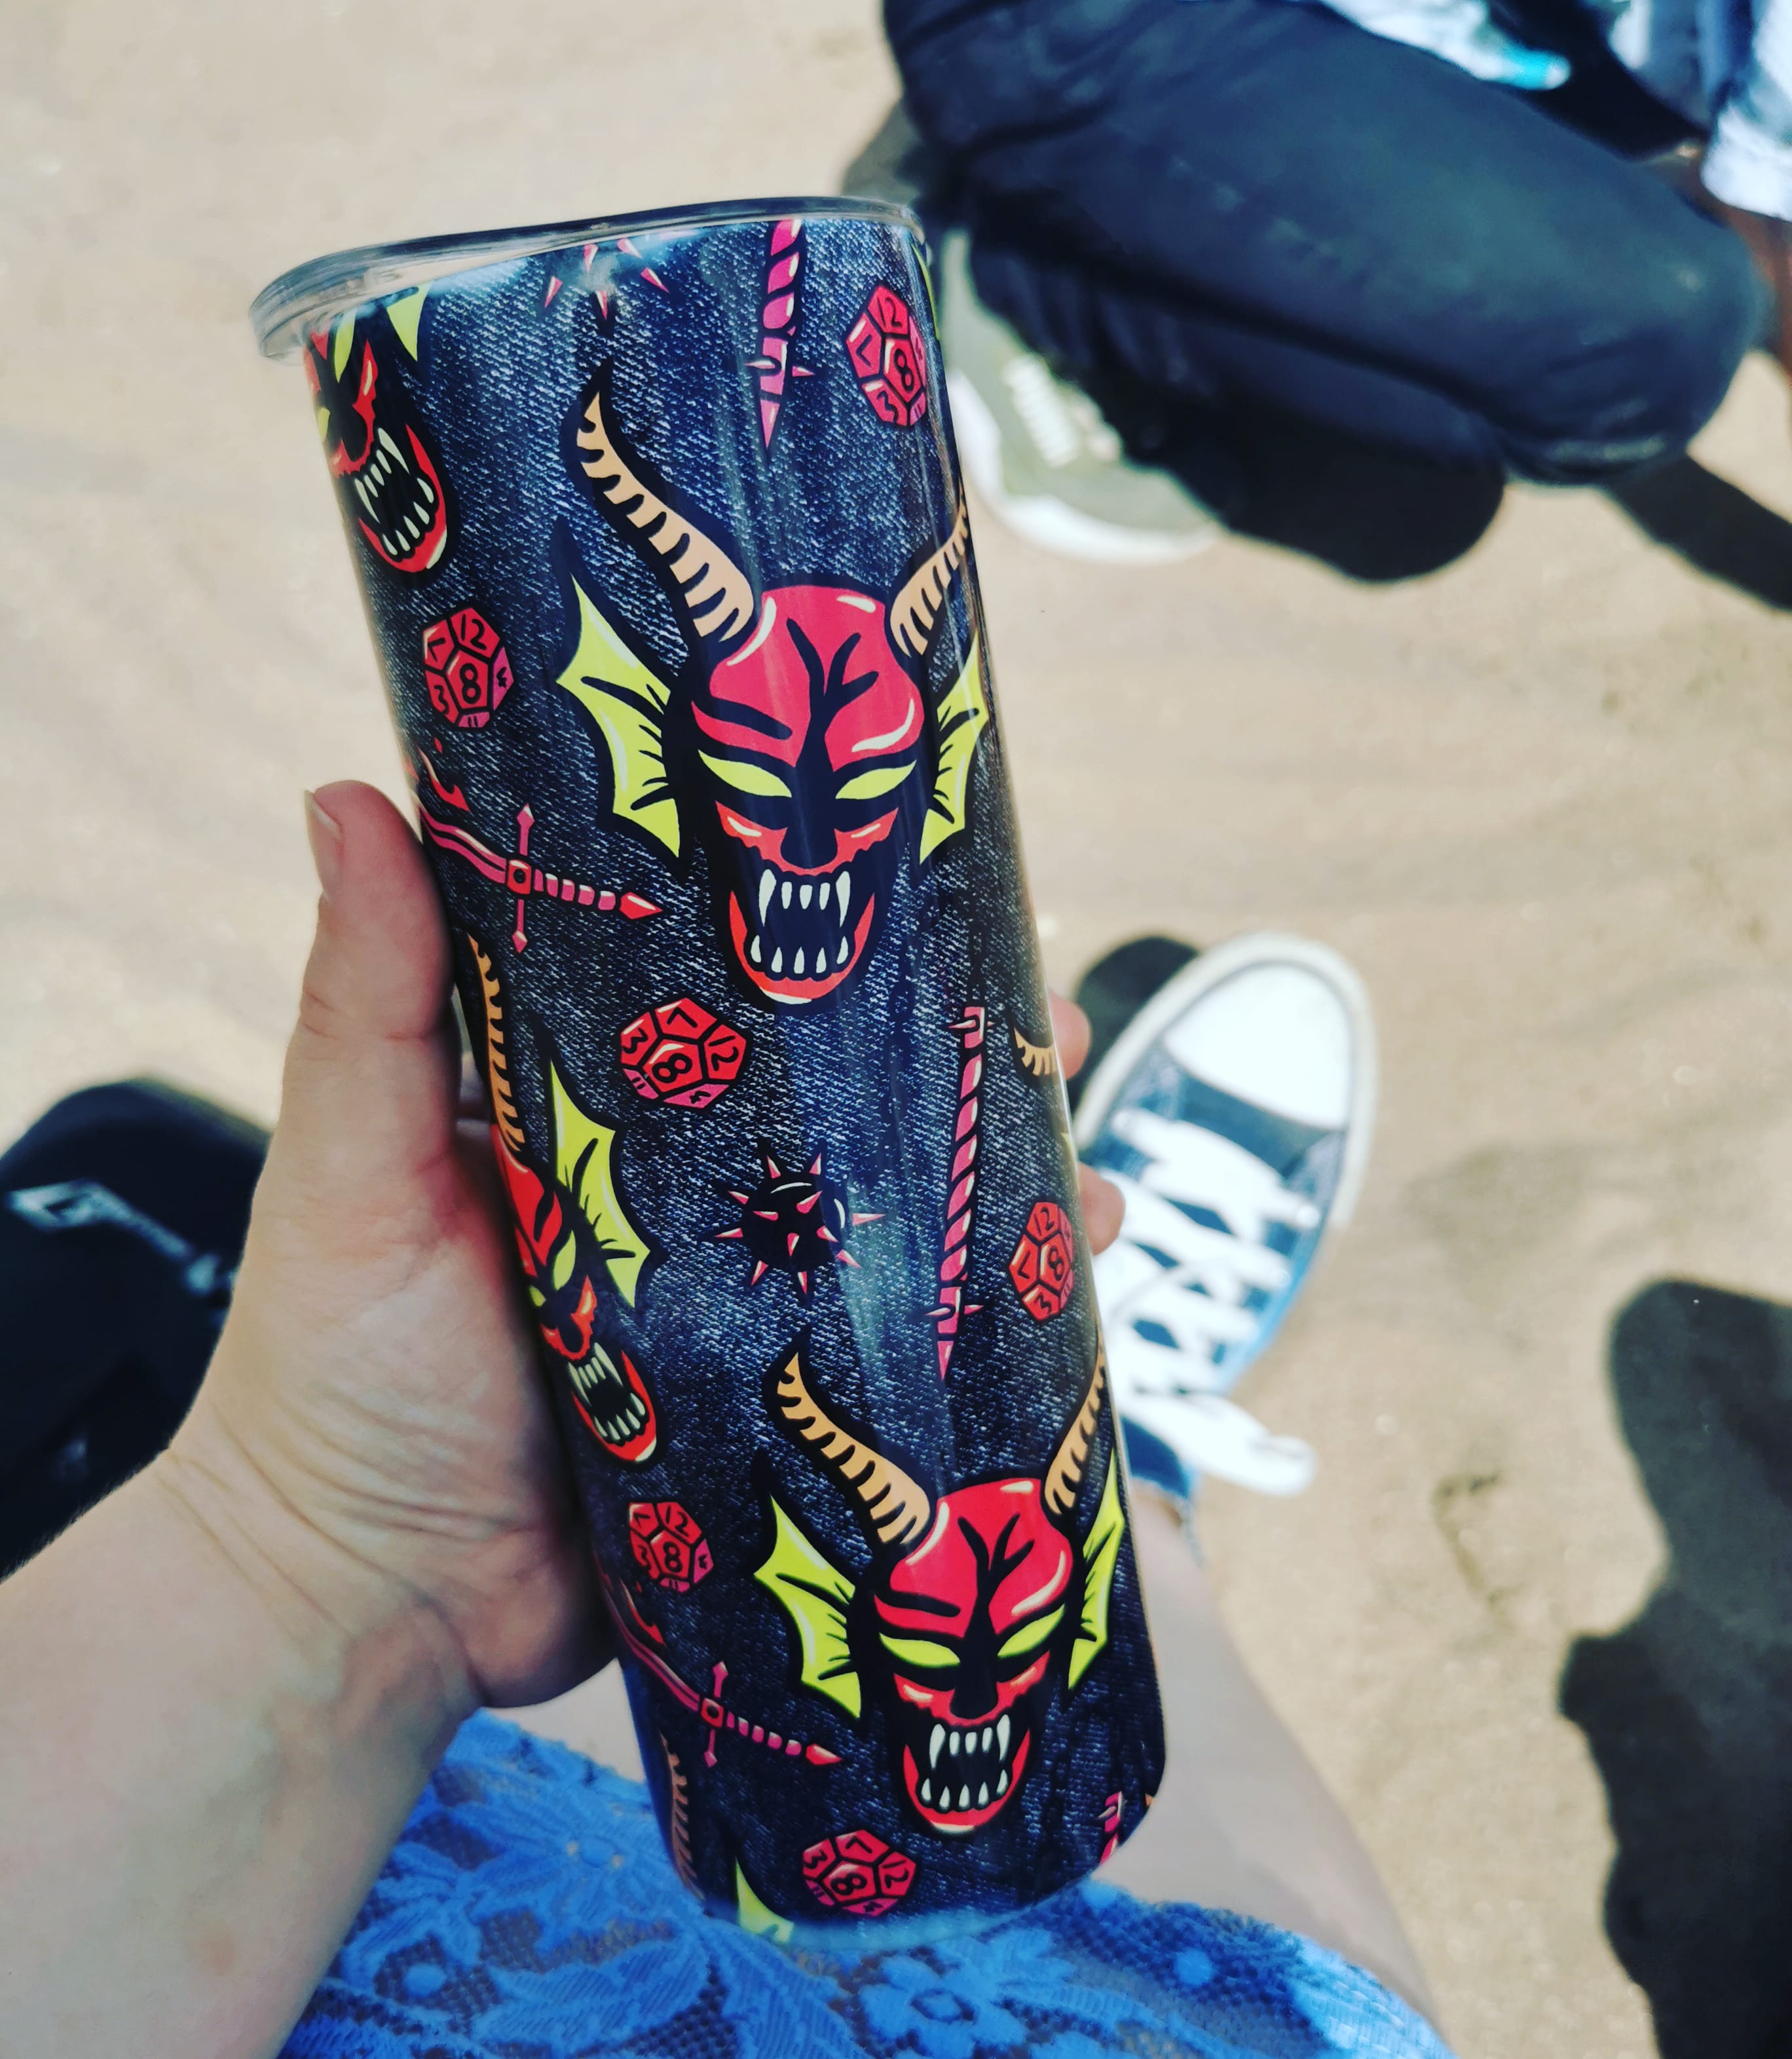 Fire-Hell Exclusive Tumbler